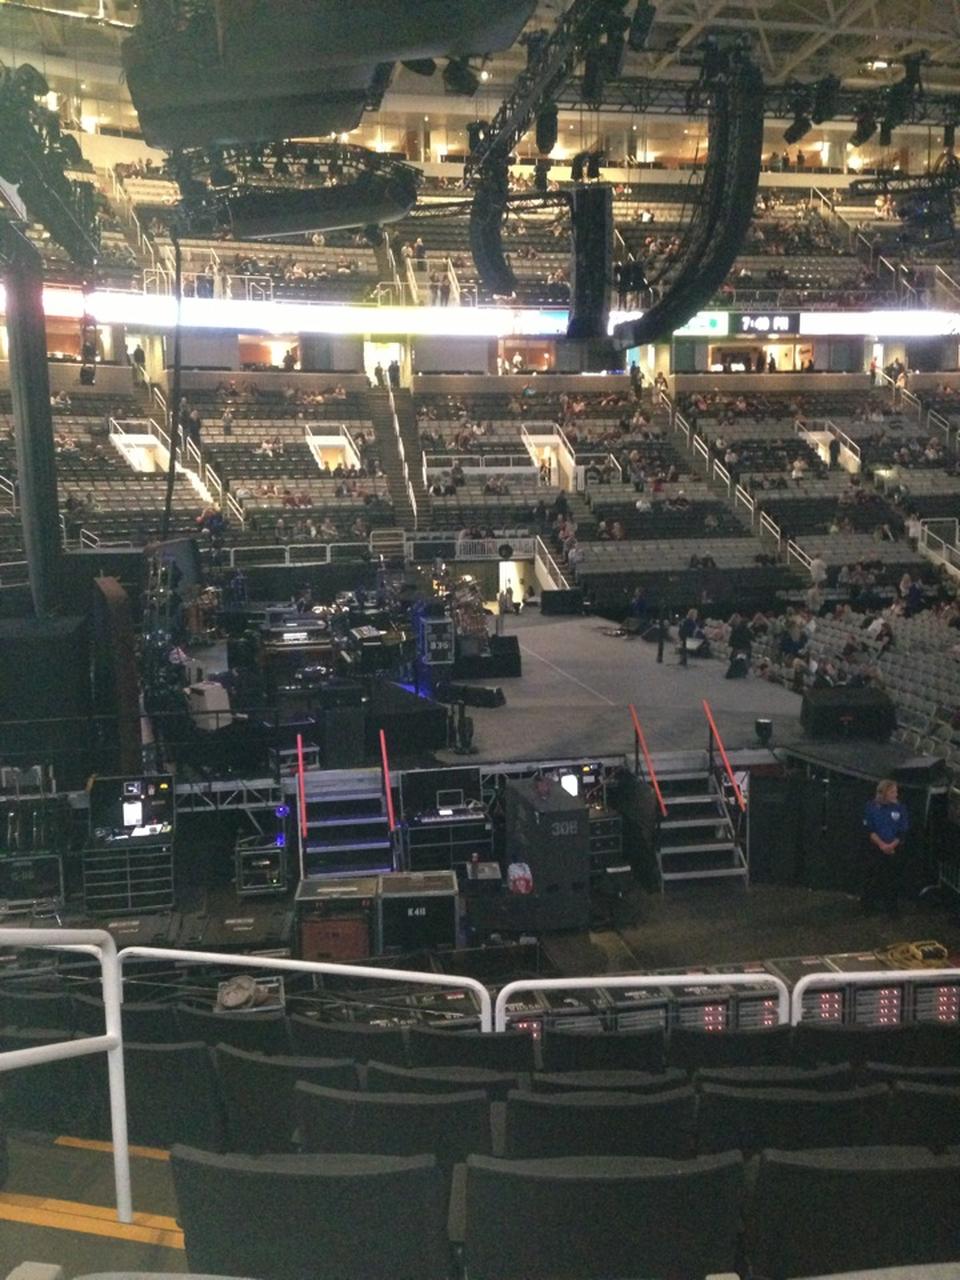 section 117, row 15 seat view  for concert - sap center